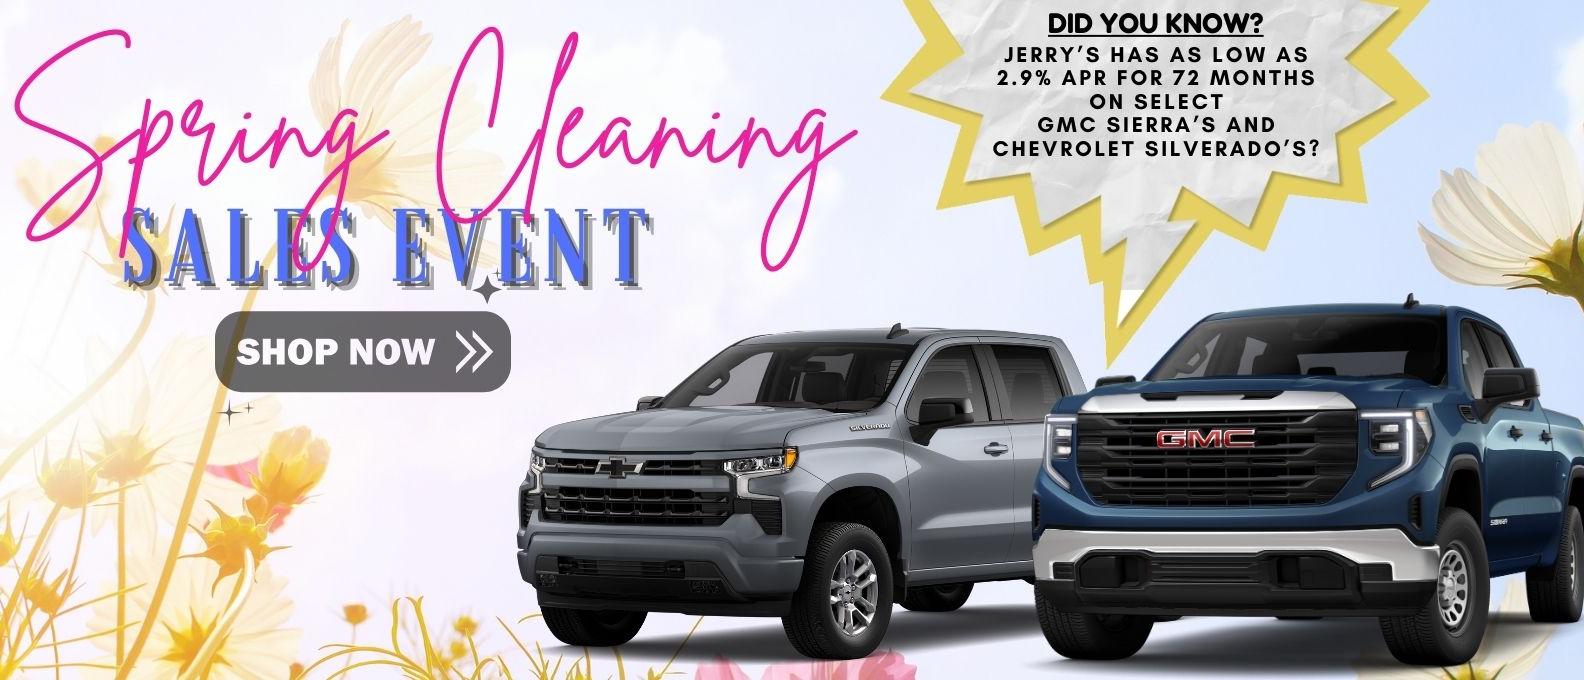 New Vehicle Specials at Jerry's.   Get as low as 2.9% APR for 72 months on select units.  W.A.C. 